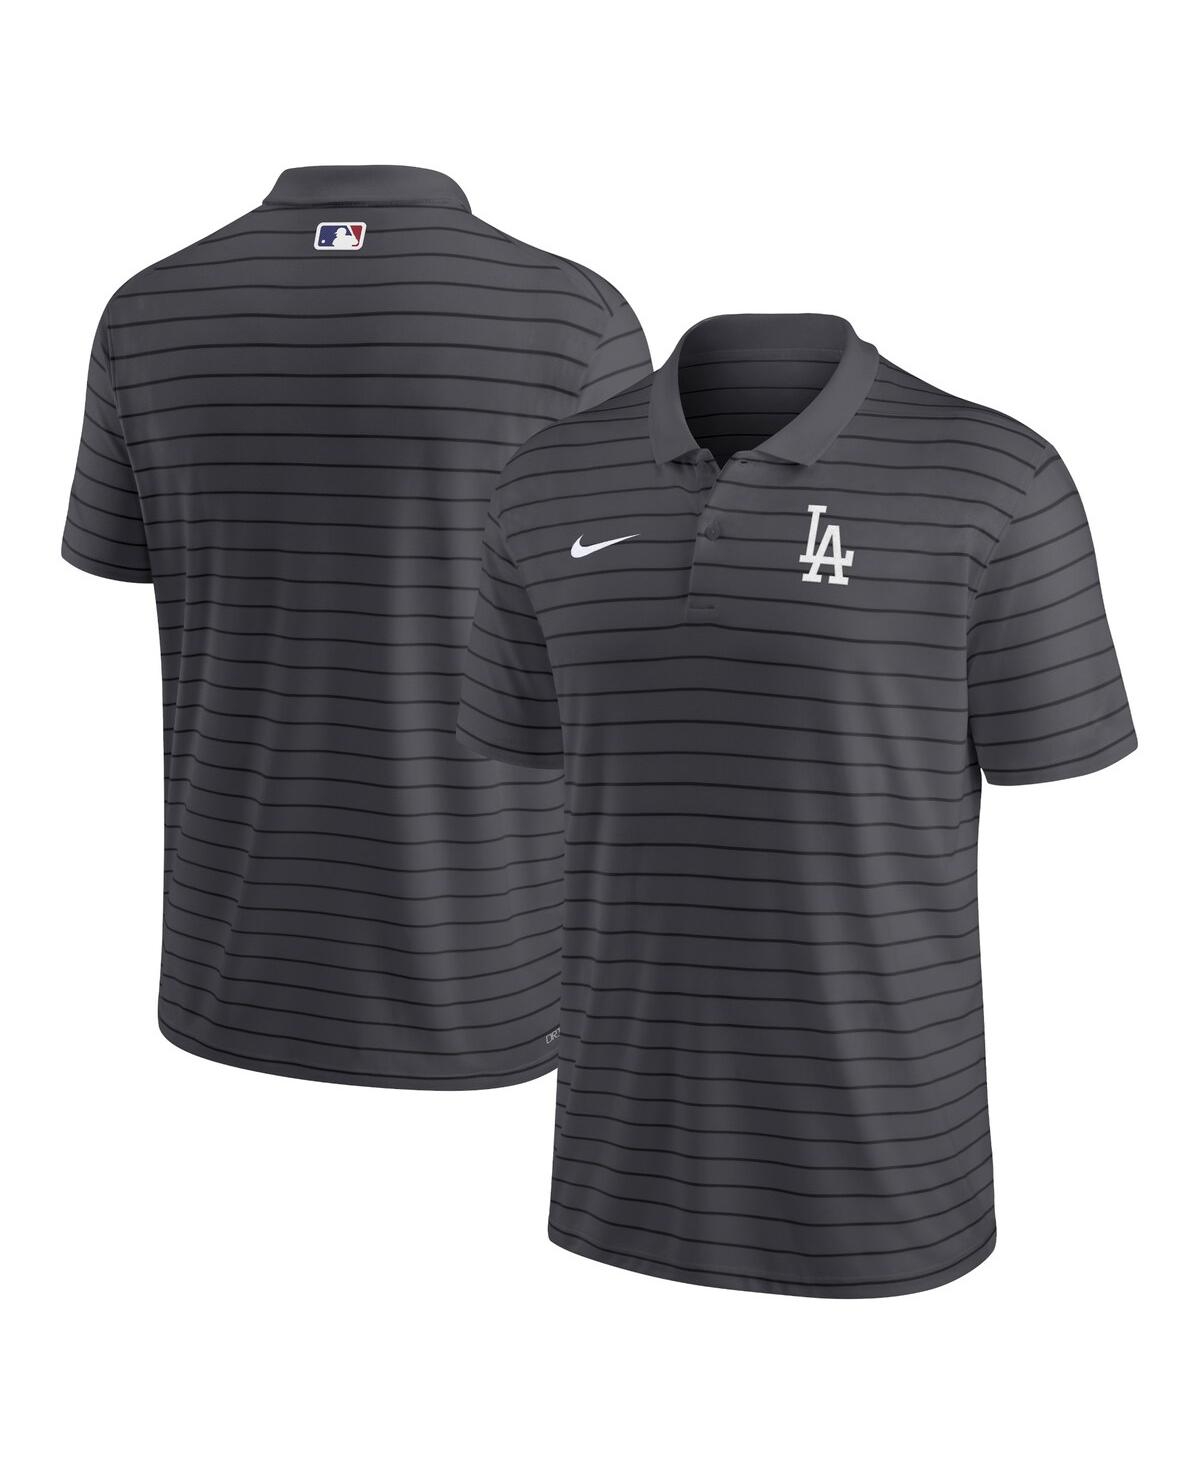 NIKE MEN'S NIKE CHARCOAL LOS ANGELES DODGERS AUTHENTIC COLLECTION VICTORY STRIPED PERFORMANCE POLO SHIRT